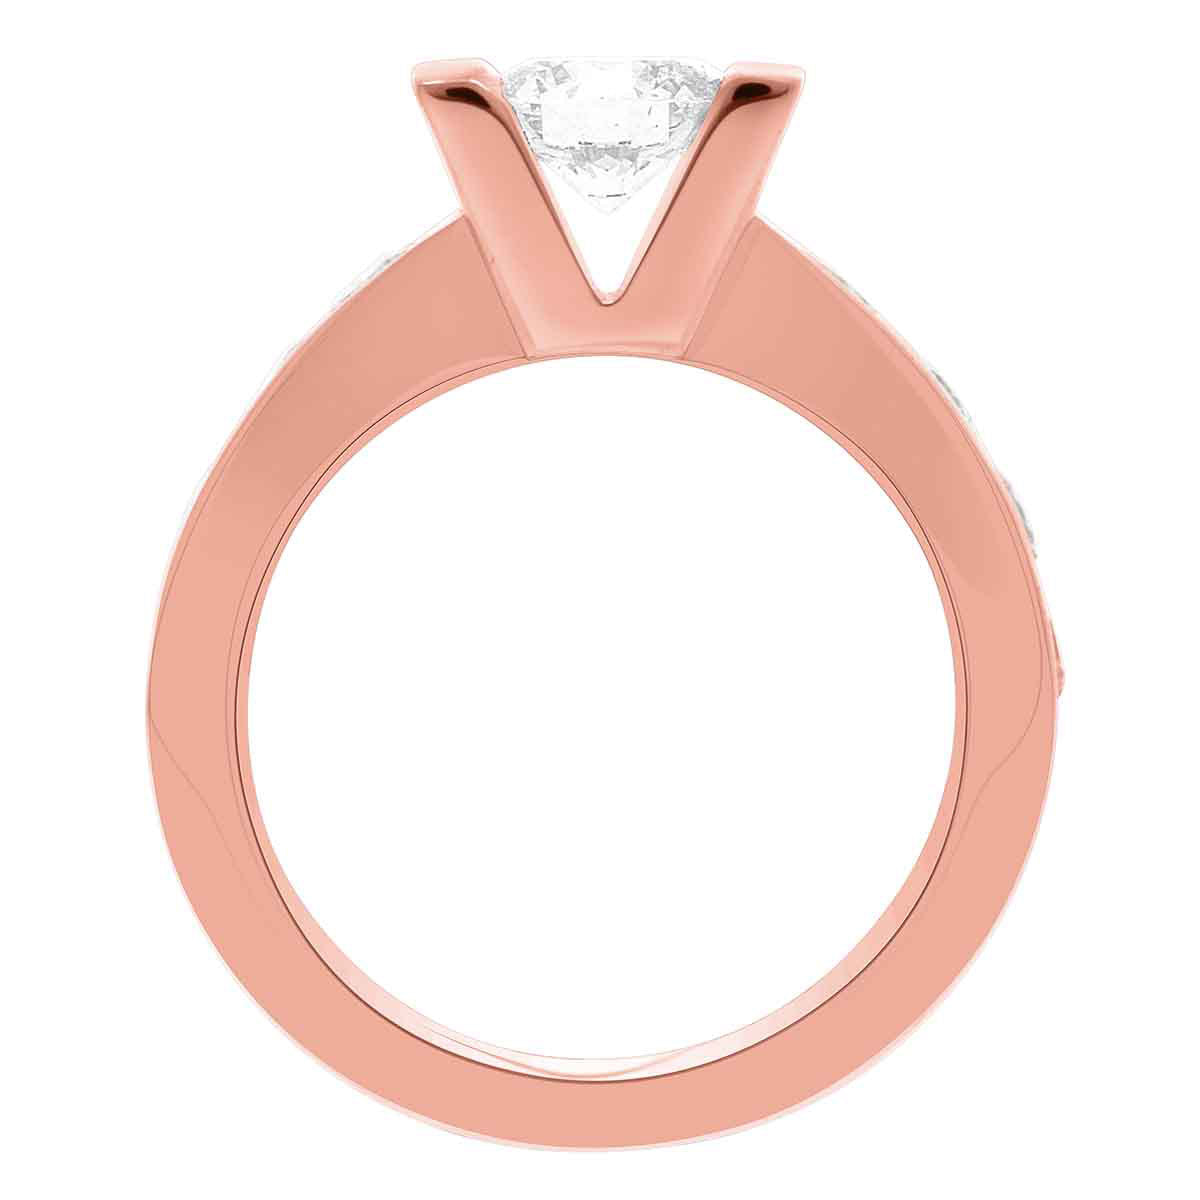 Custom Made Engagement Ring made from rose gold standing upright